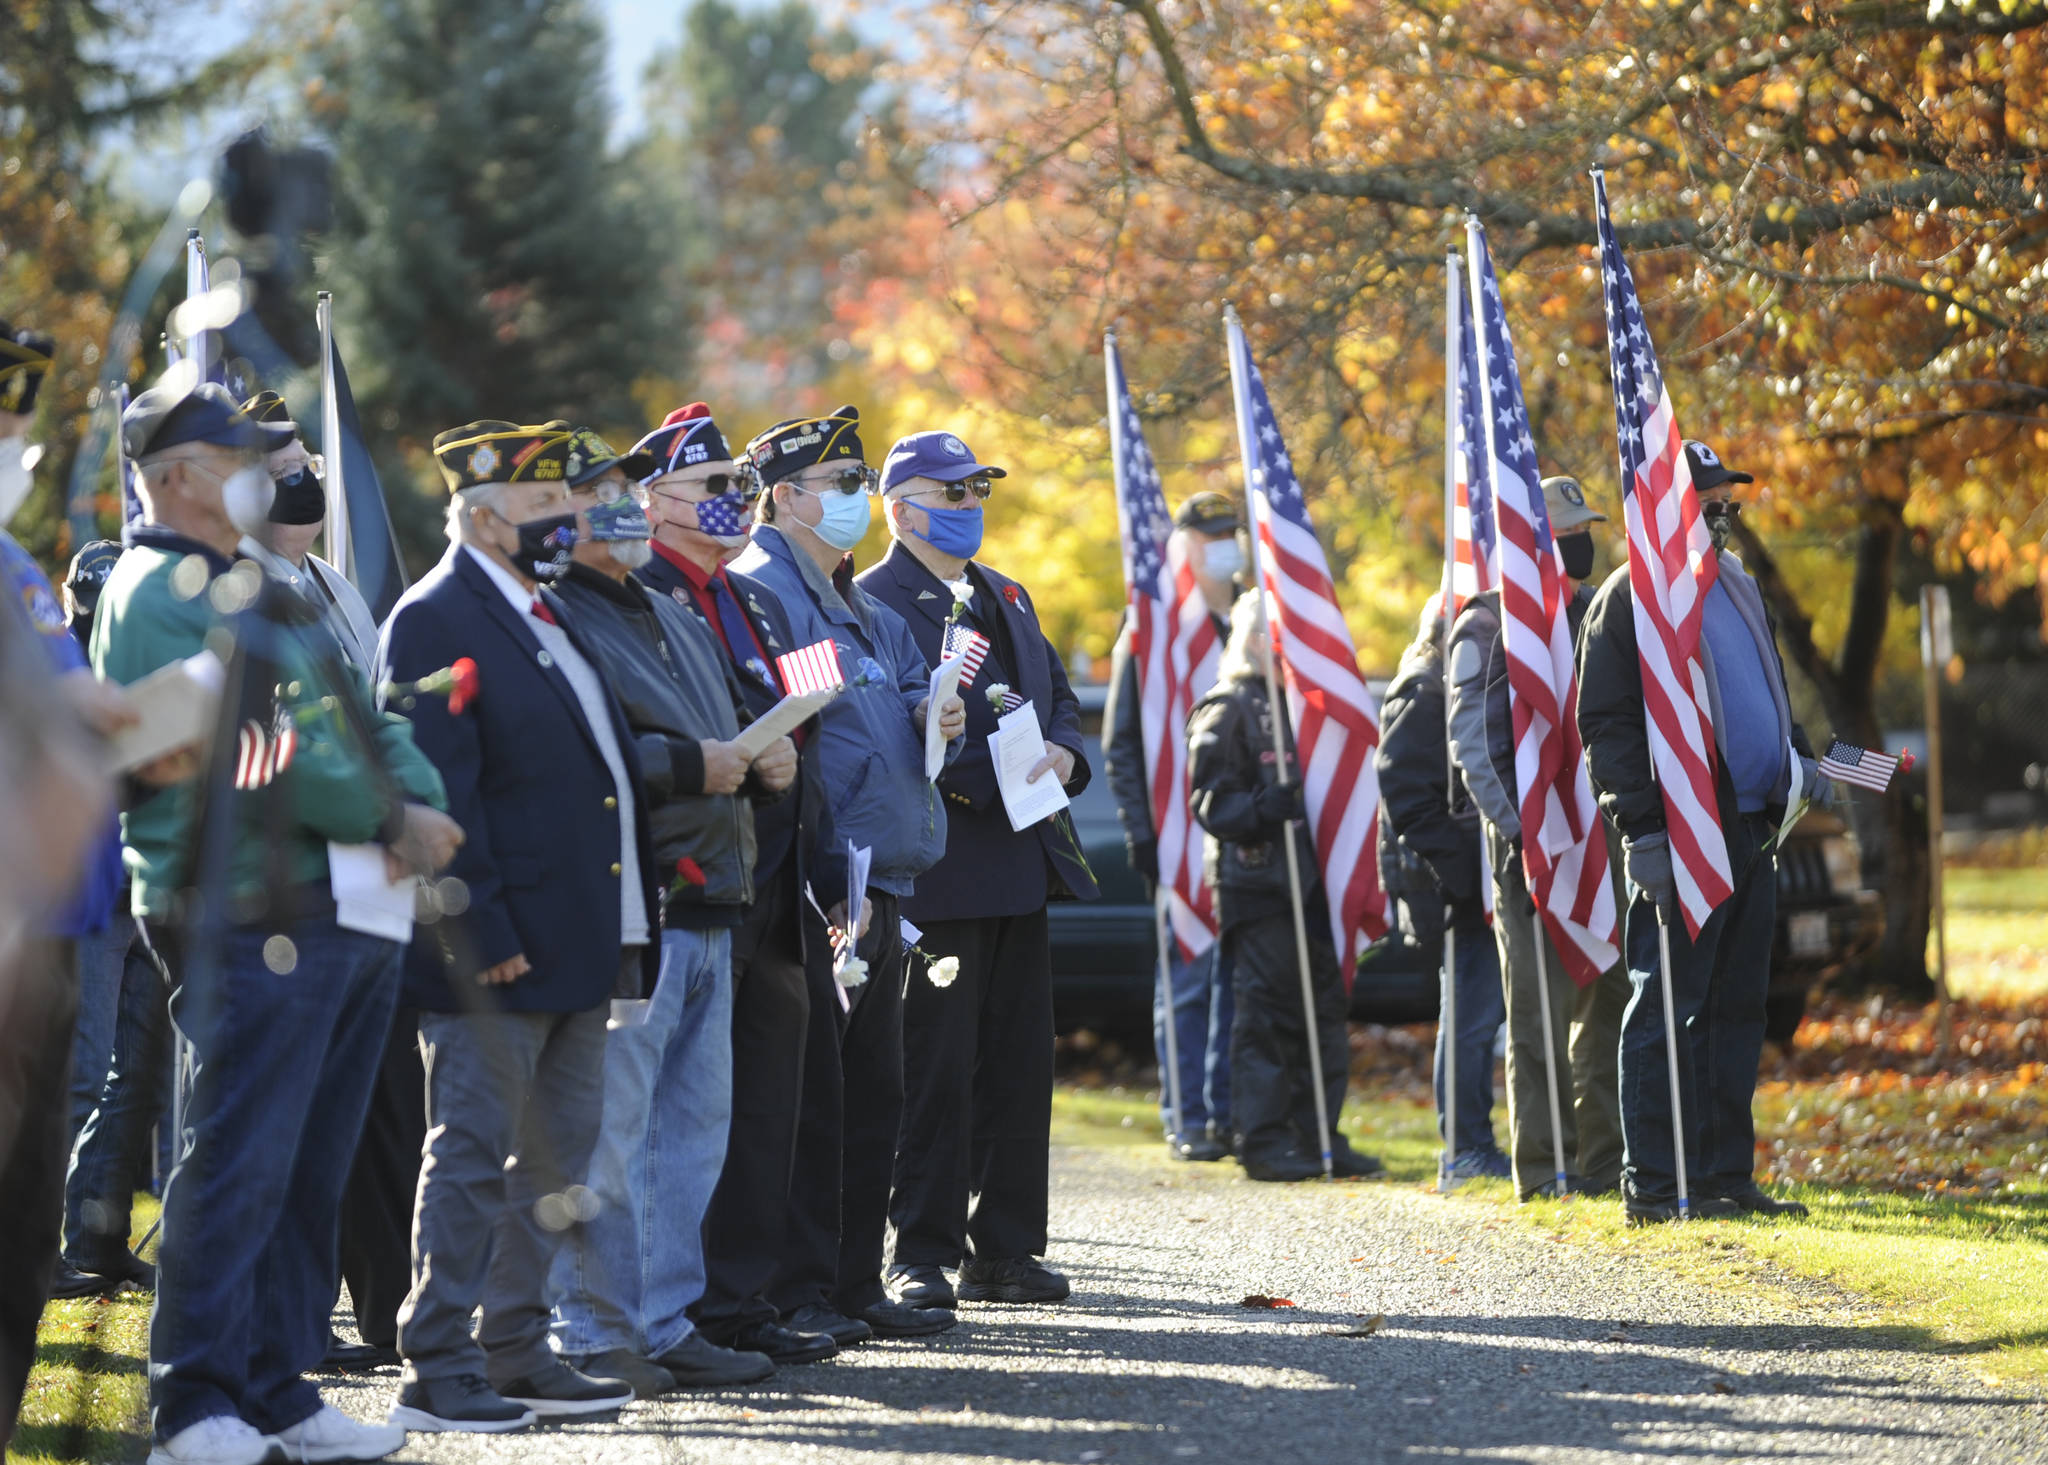 Veterans and their families — about 125 in all — enjoy a special Veterans Day presentation on Nov. 11 at Pioneer Memorial Park. The event was hosted by Jack Grennan Post 62 American Legion, Michael Trebert Chapter-NSDAR and the Sequim Prairie Garden Club. Sequim Gazette photos by Michael Dashiell